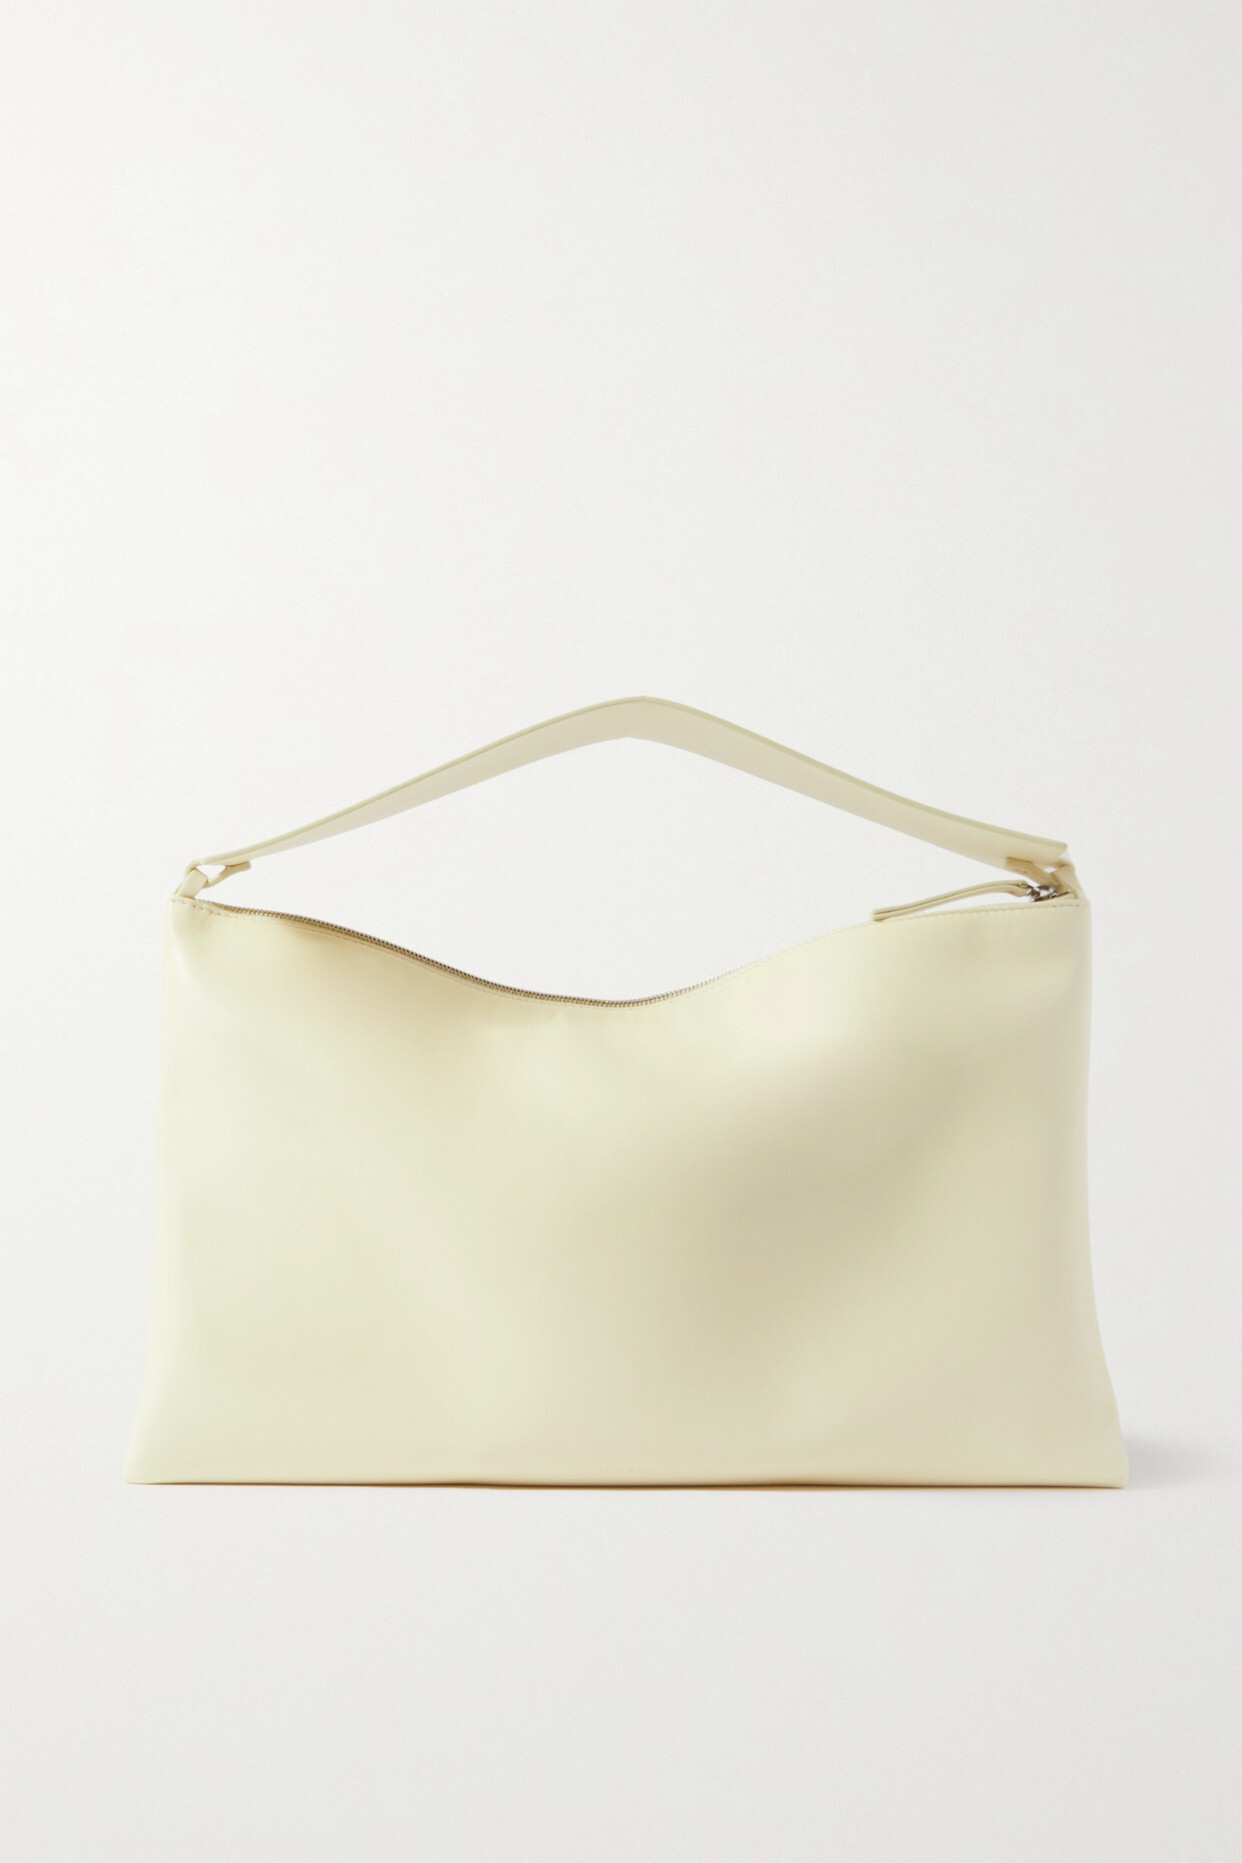 The Row - Emy Leather Shoulder Bag - White